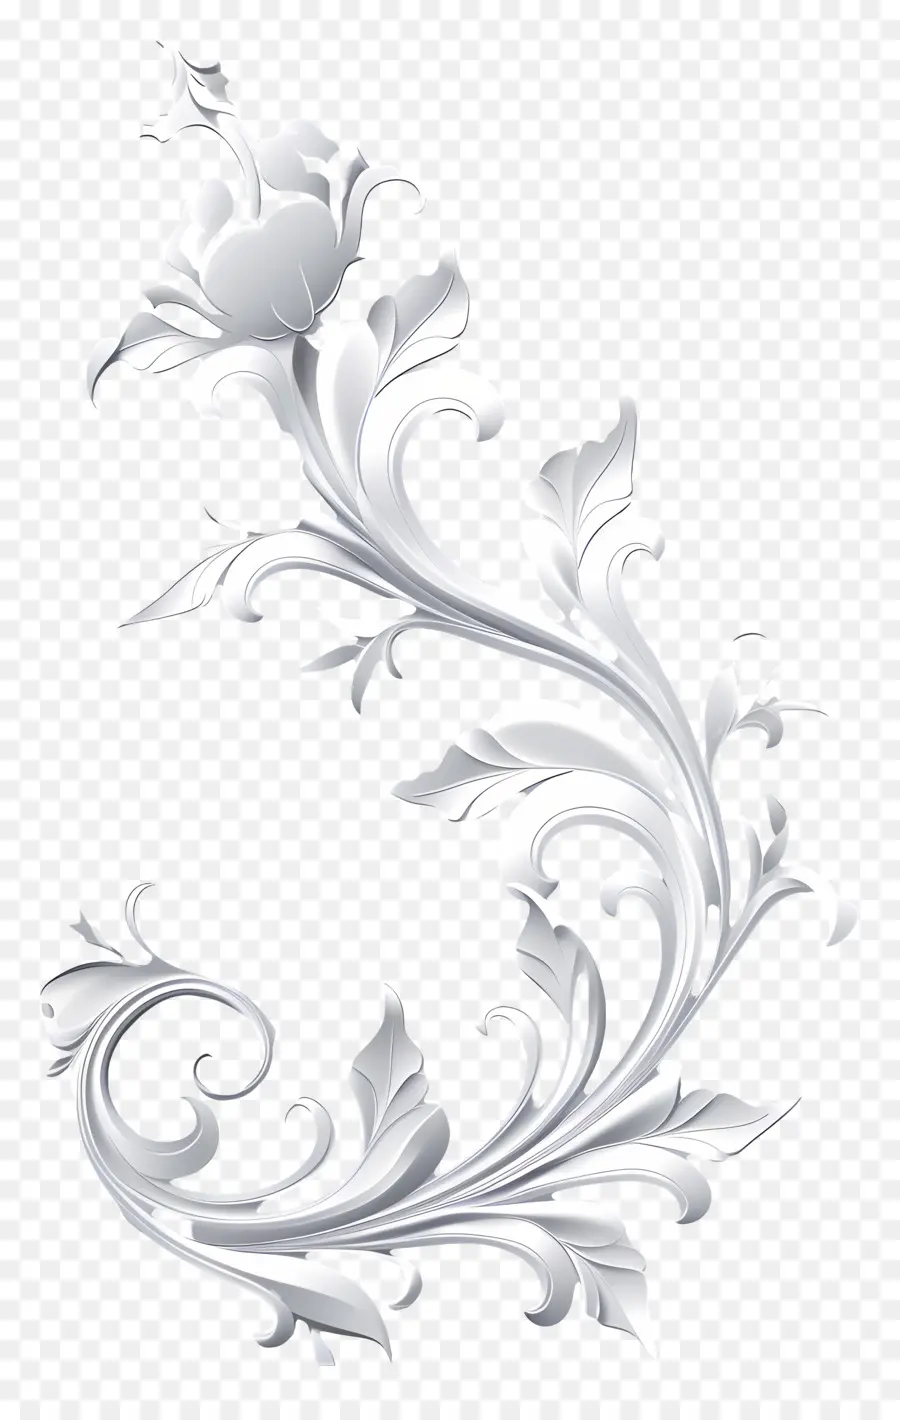 Canto，Design Floral PNG